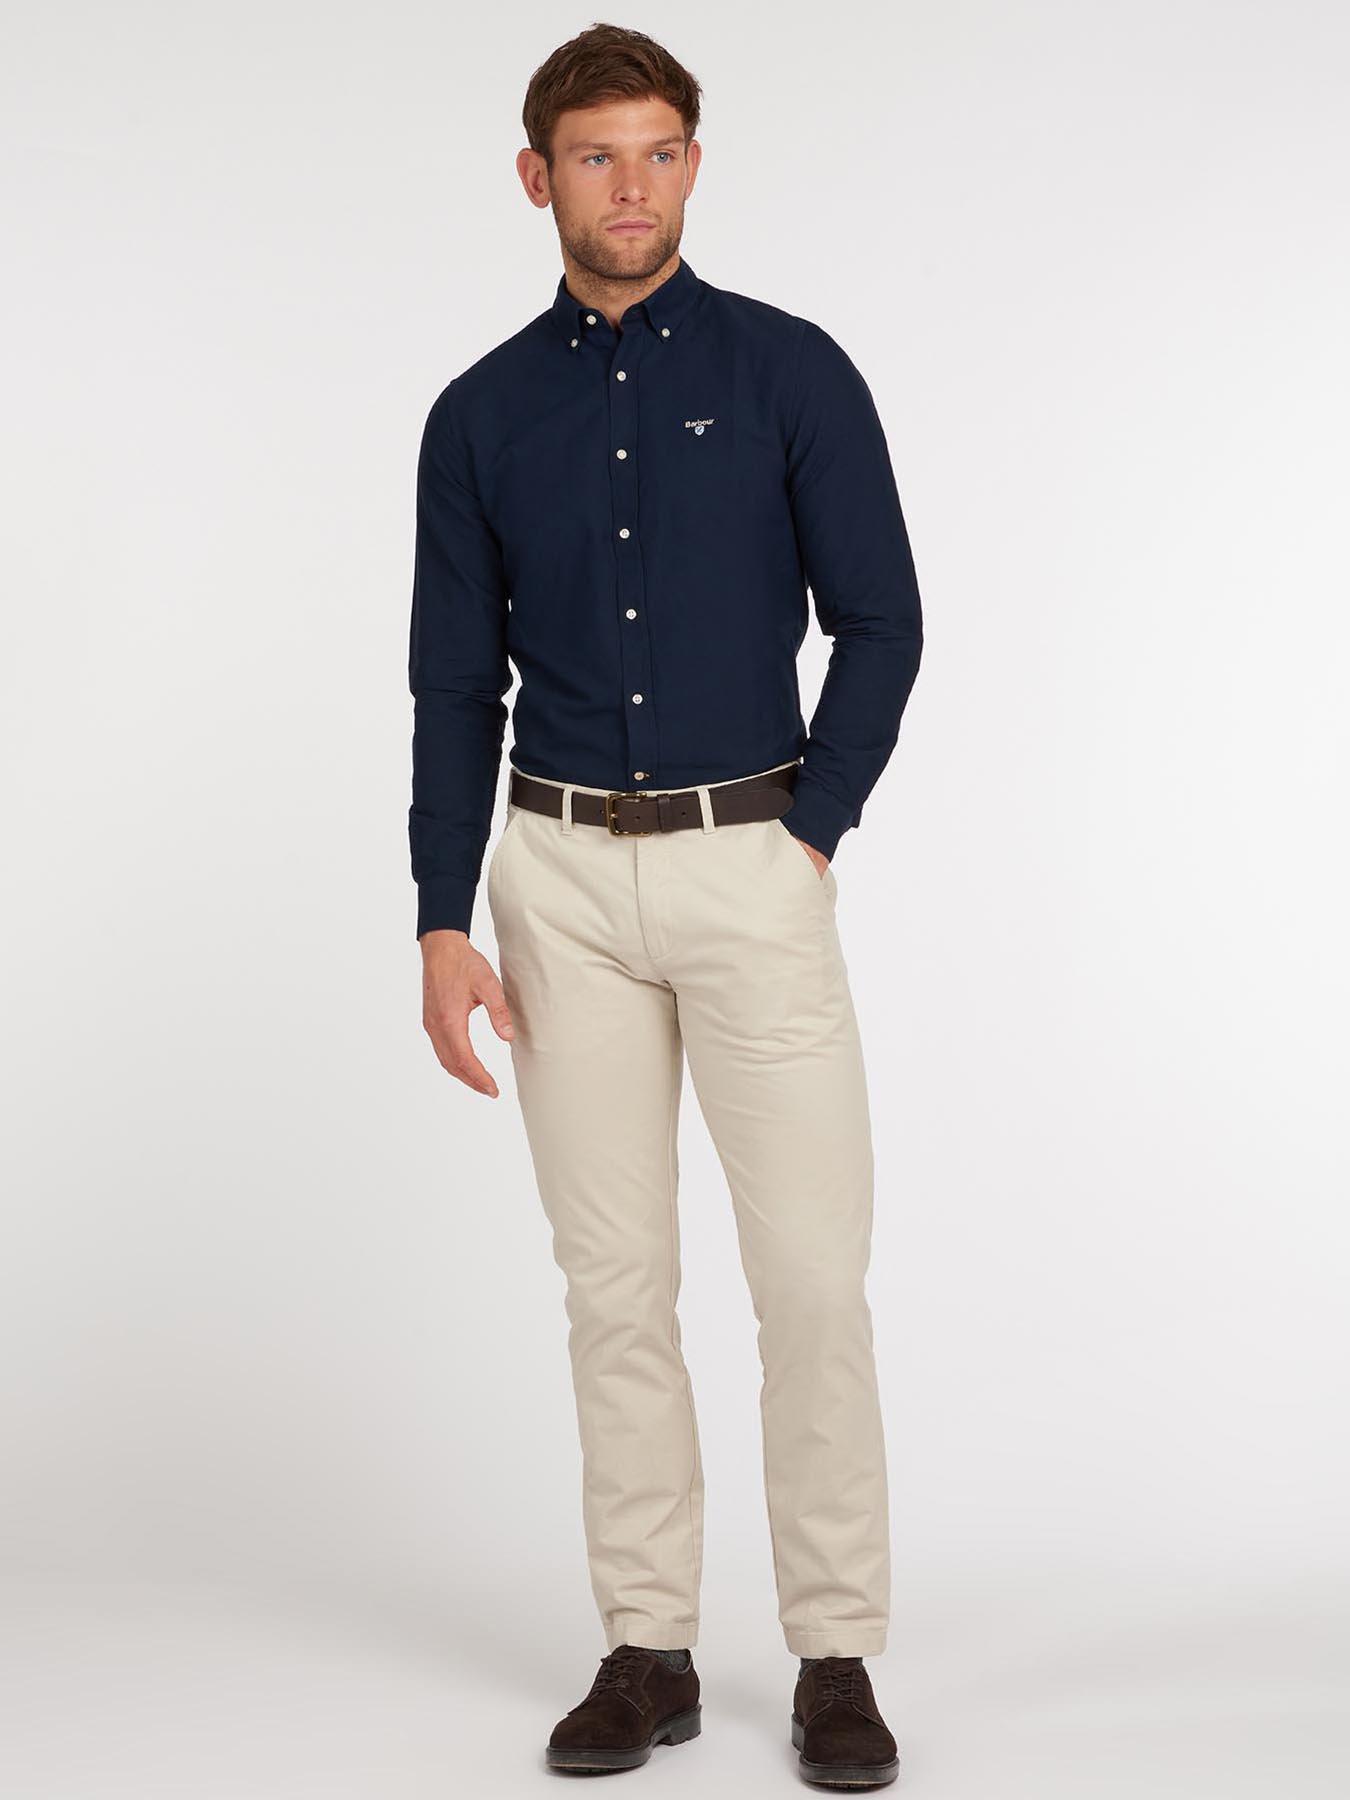  Oxford Tailored Shirt - Navy